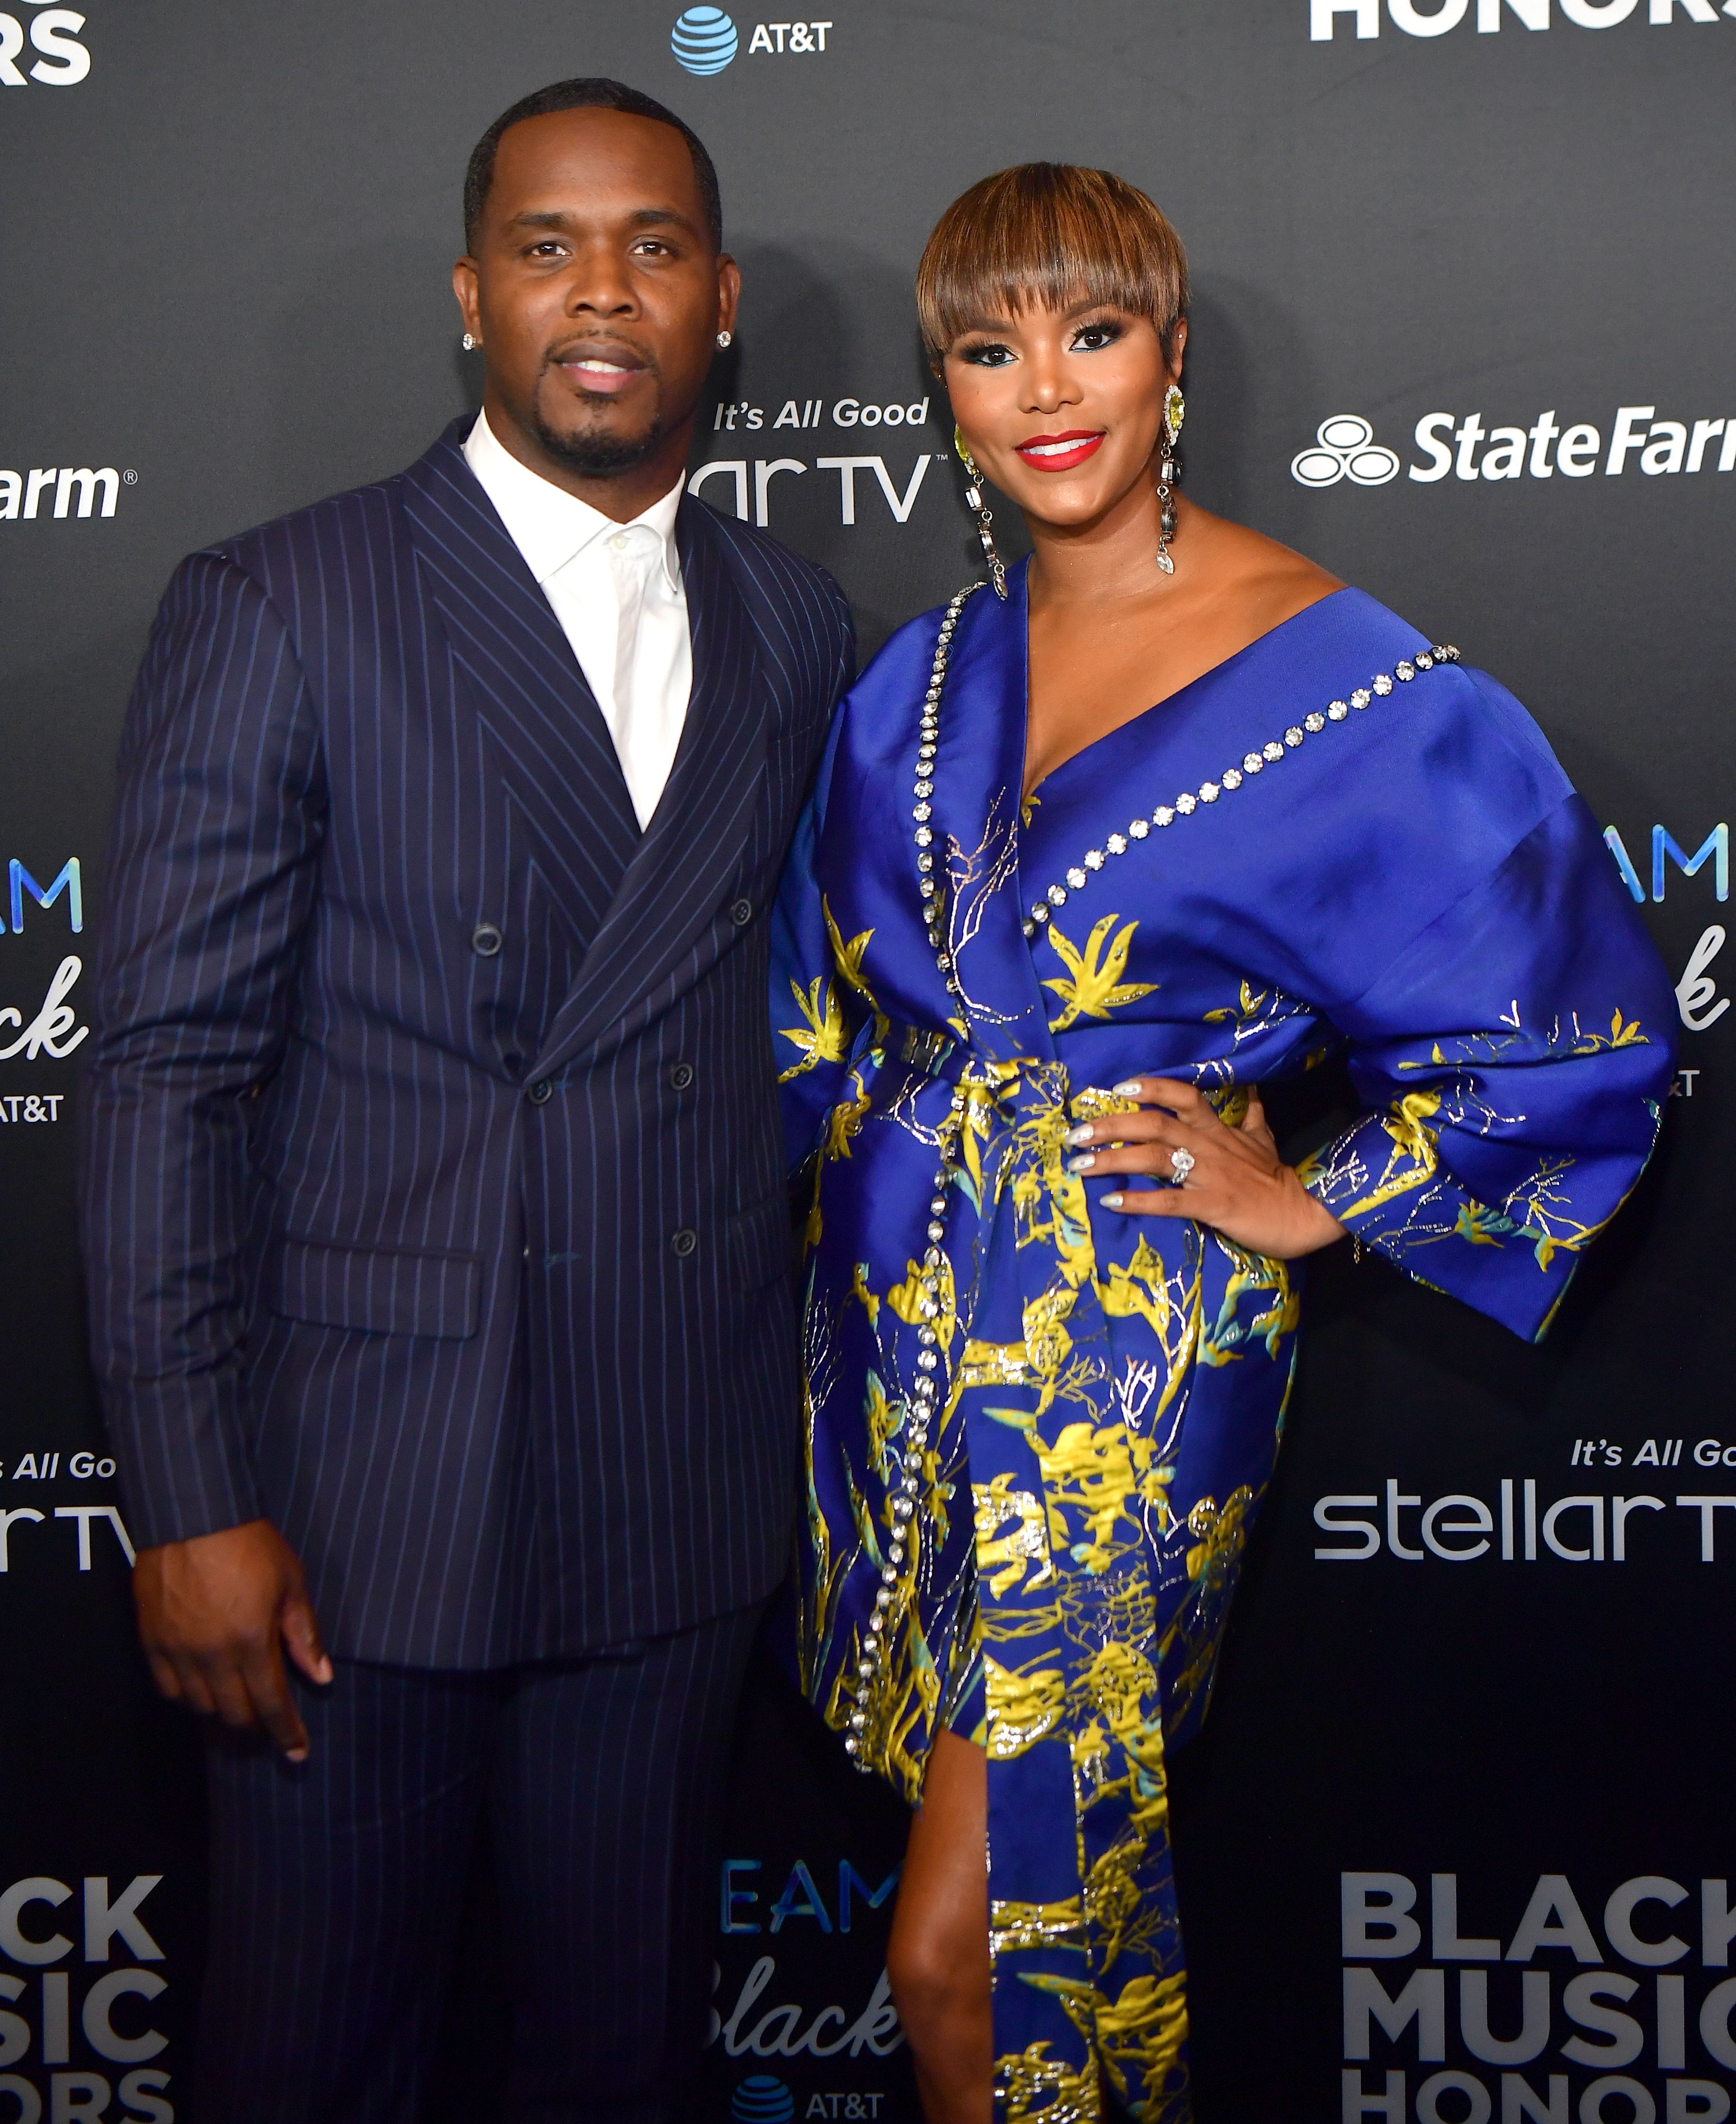 Tommicus Walker and LeToya Luckett-Walker during the 2019 Black Music Honors - Arrivals at Cobb Energy Performing Arts Center on September 5, 2019 in Atlanta, Georgia. | Source: Getty Images